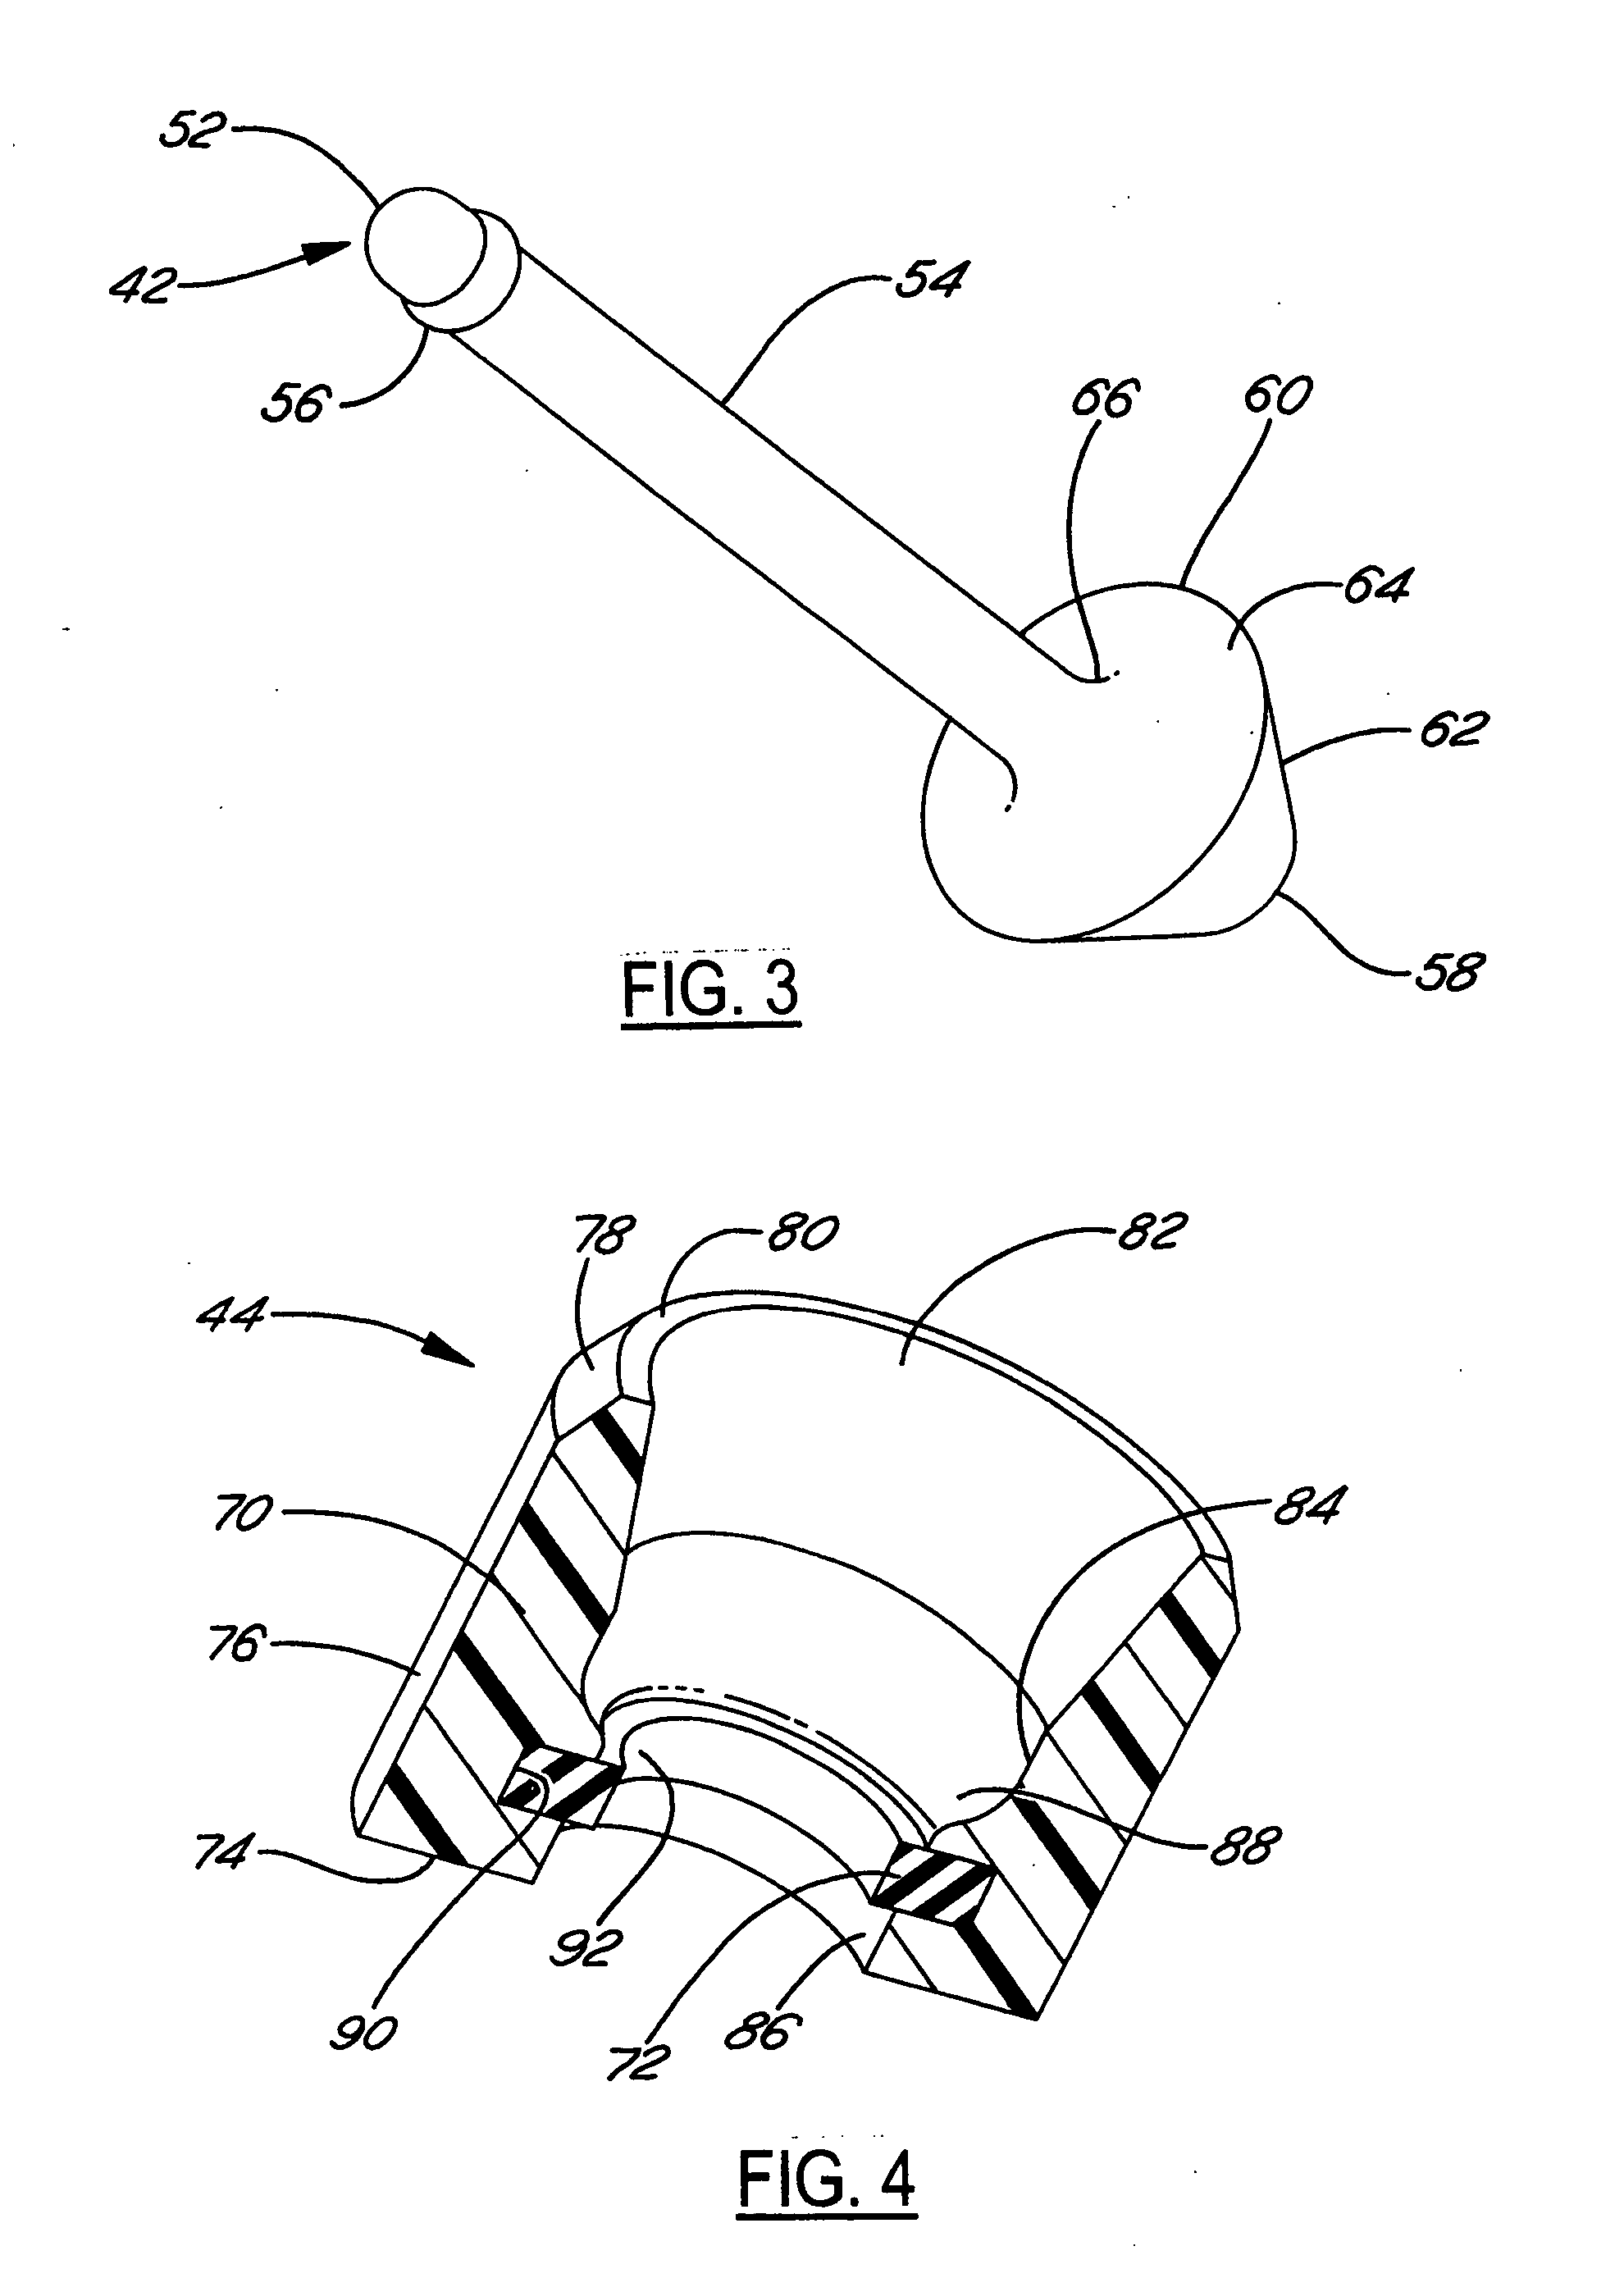 Check valve apparatus for fuel delivery systems